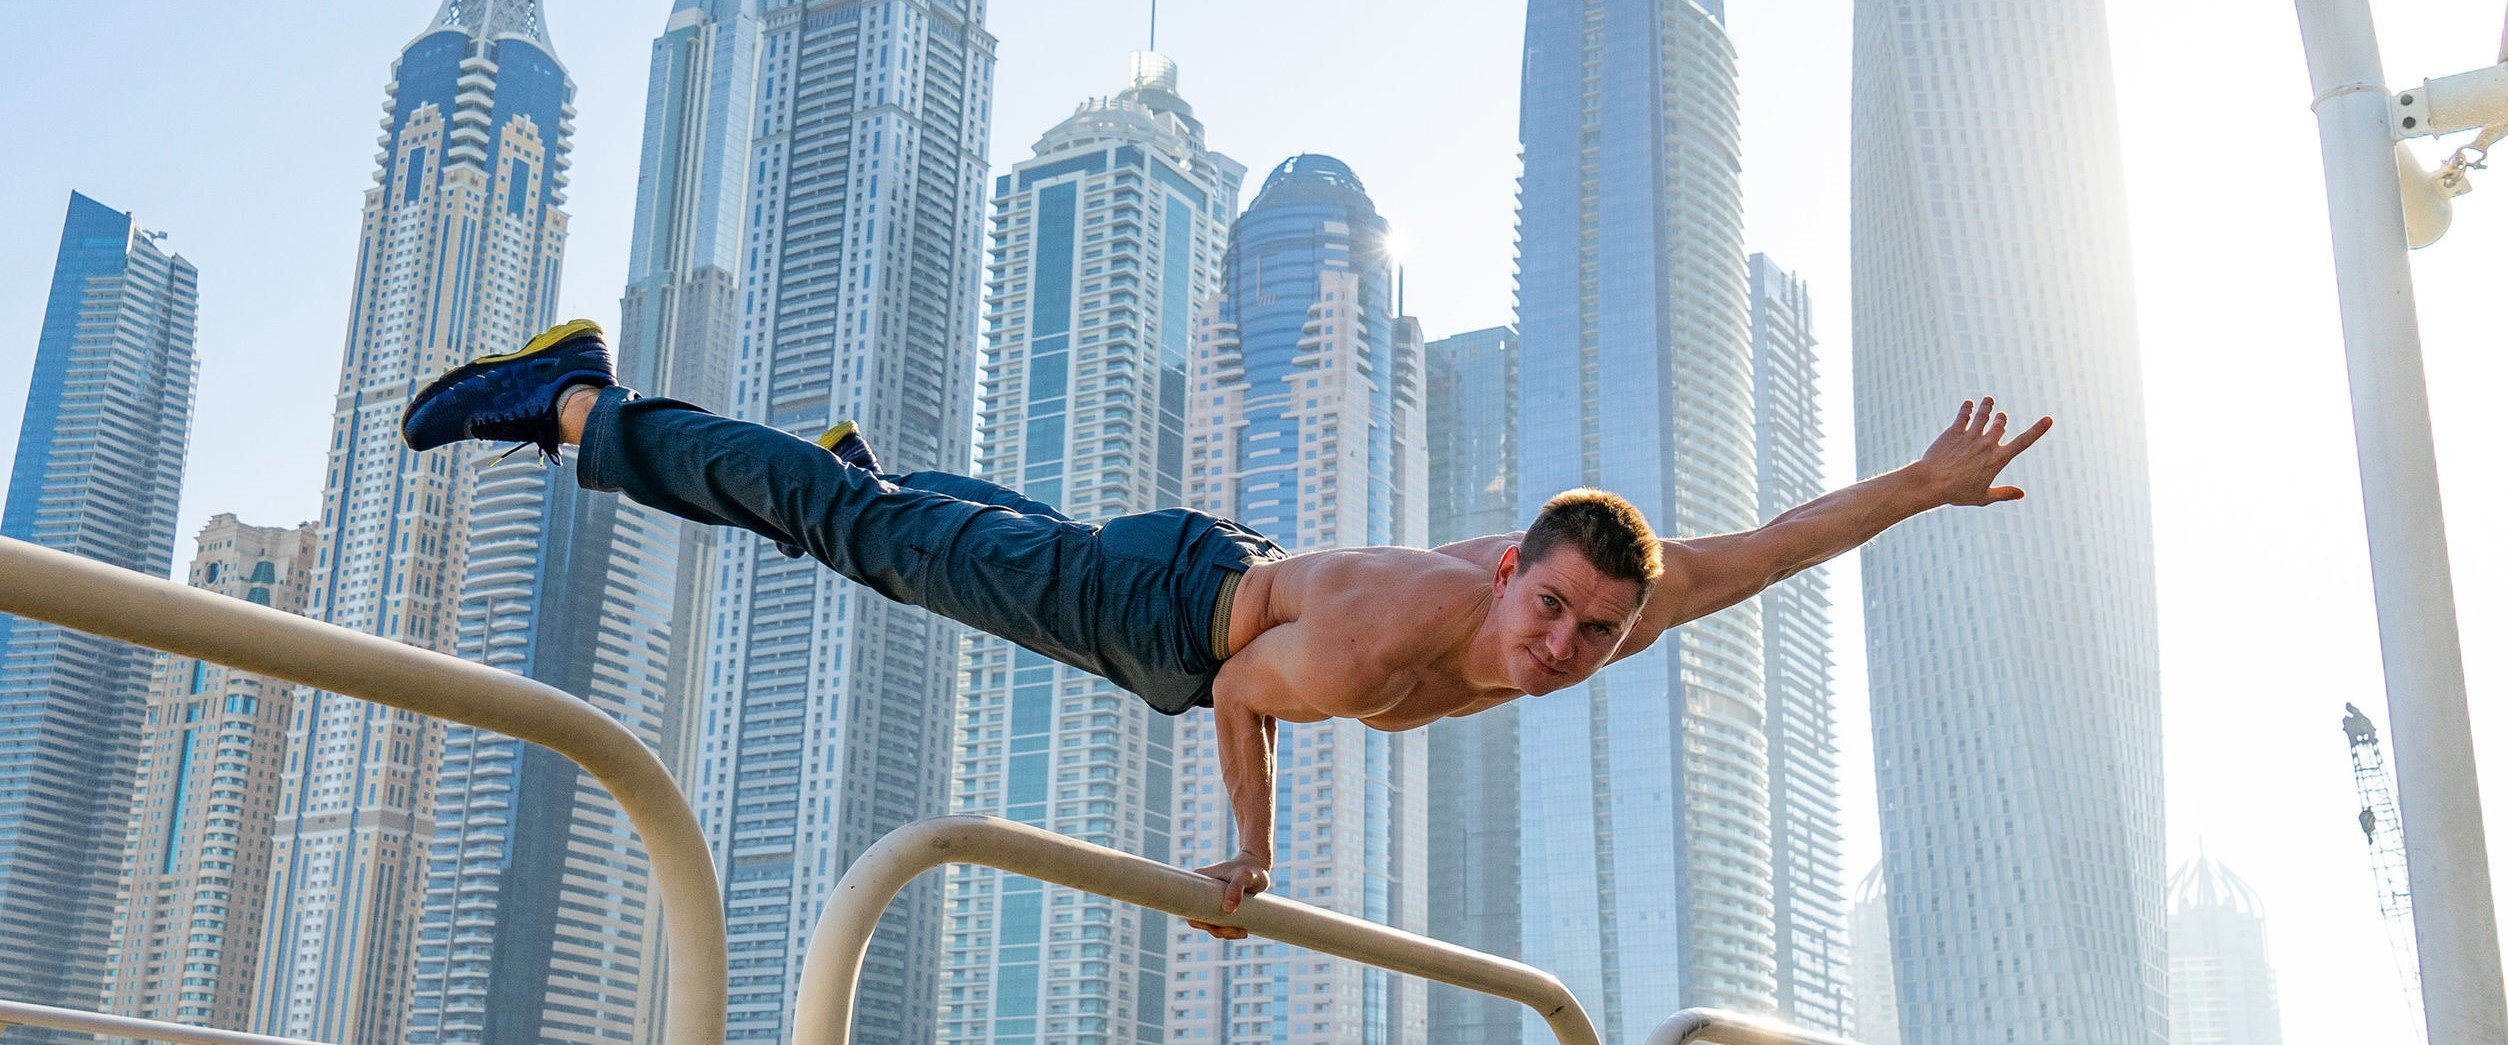 Muscular man doing workout on the street with cityscape of skyscrapers on background in Dubai. Concept of healthy lifestyle and modern